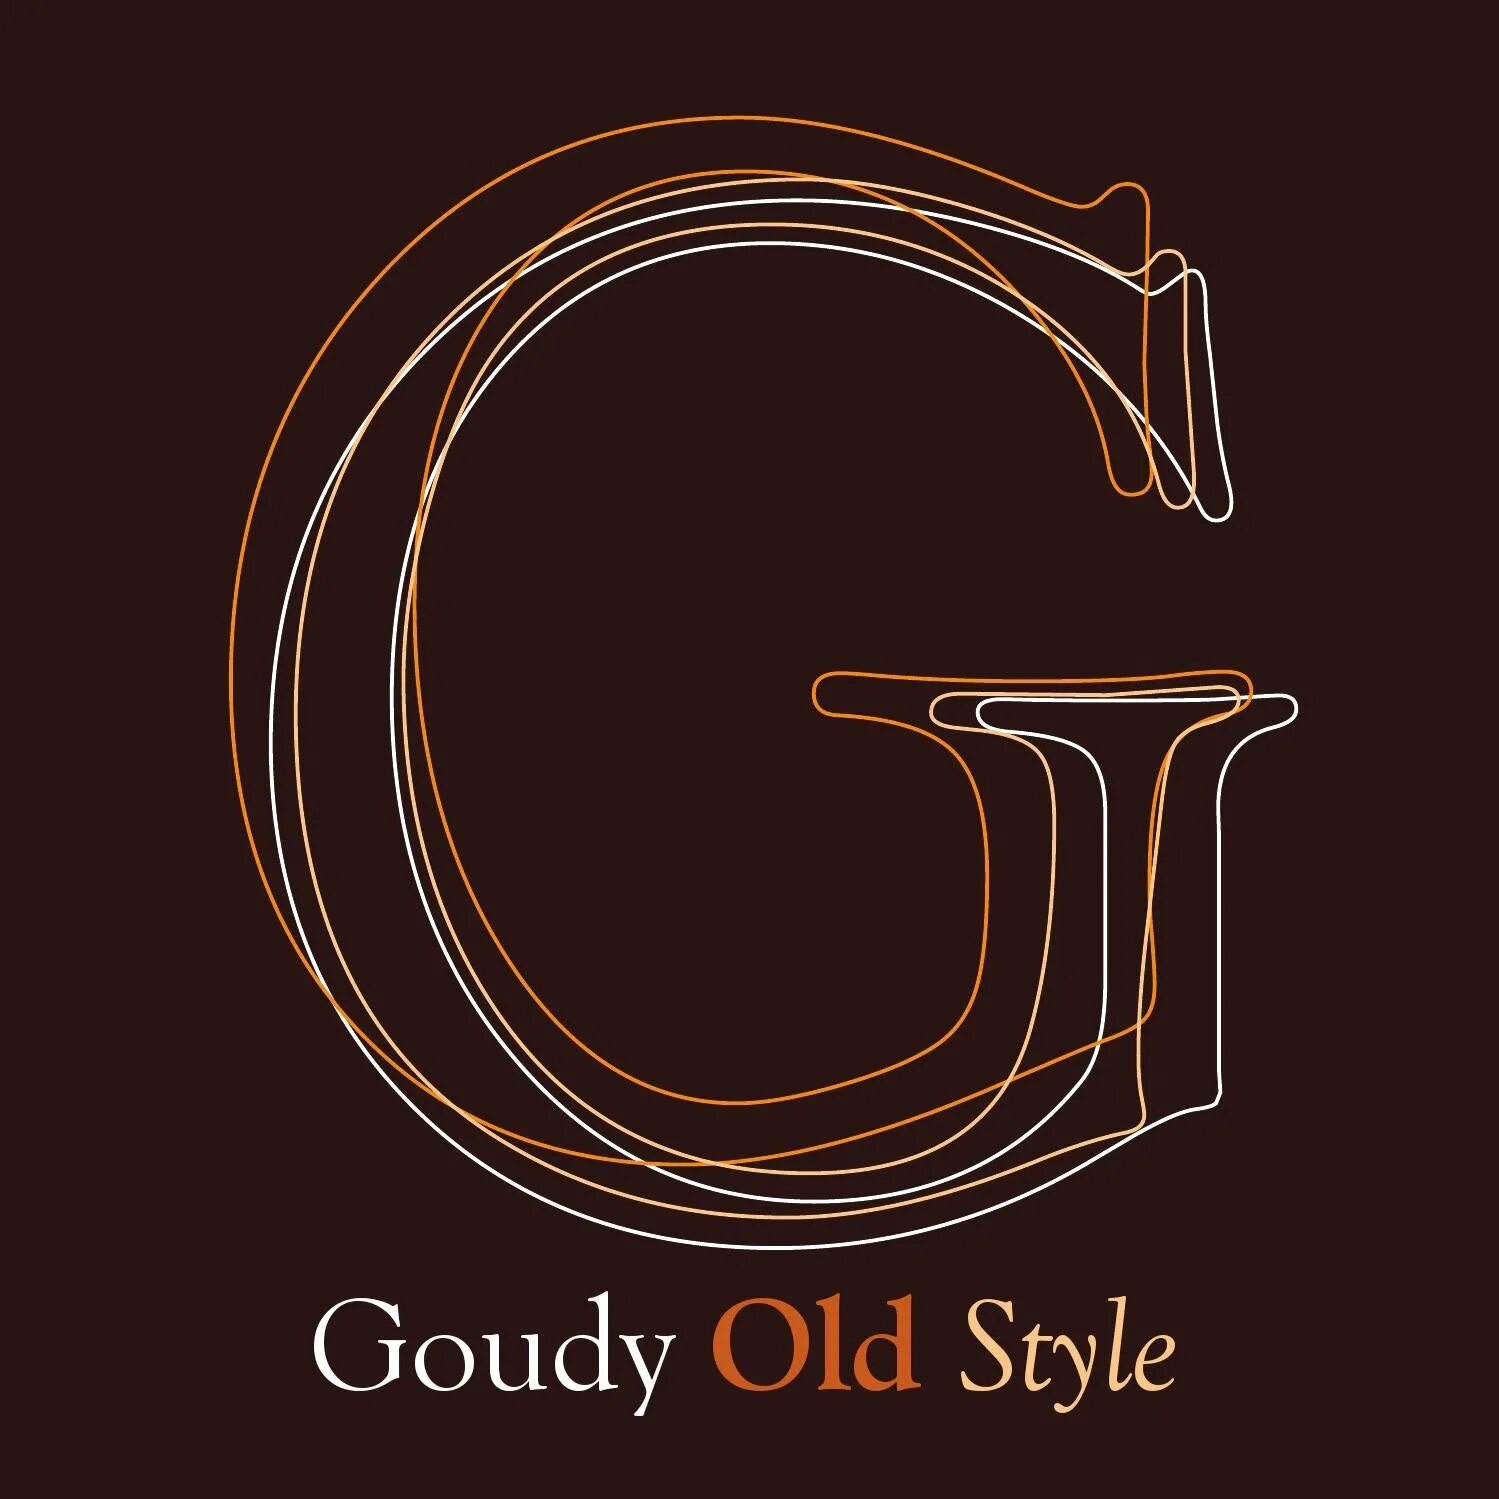 Old Style шрифт. Шрифт Bookman old Style. Шрифт Goudy. Шрифт в стиле Модерн. Шрифты old style